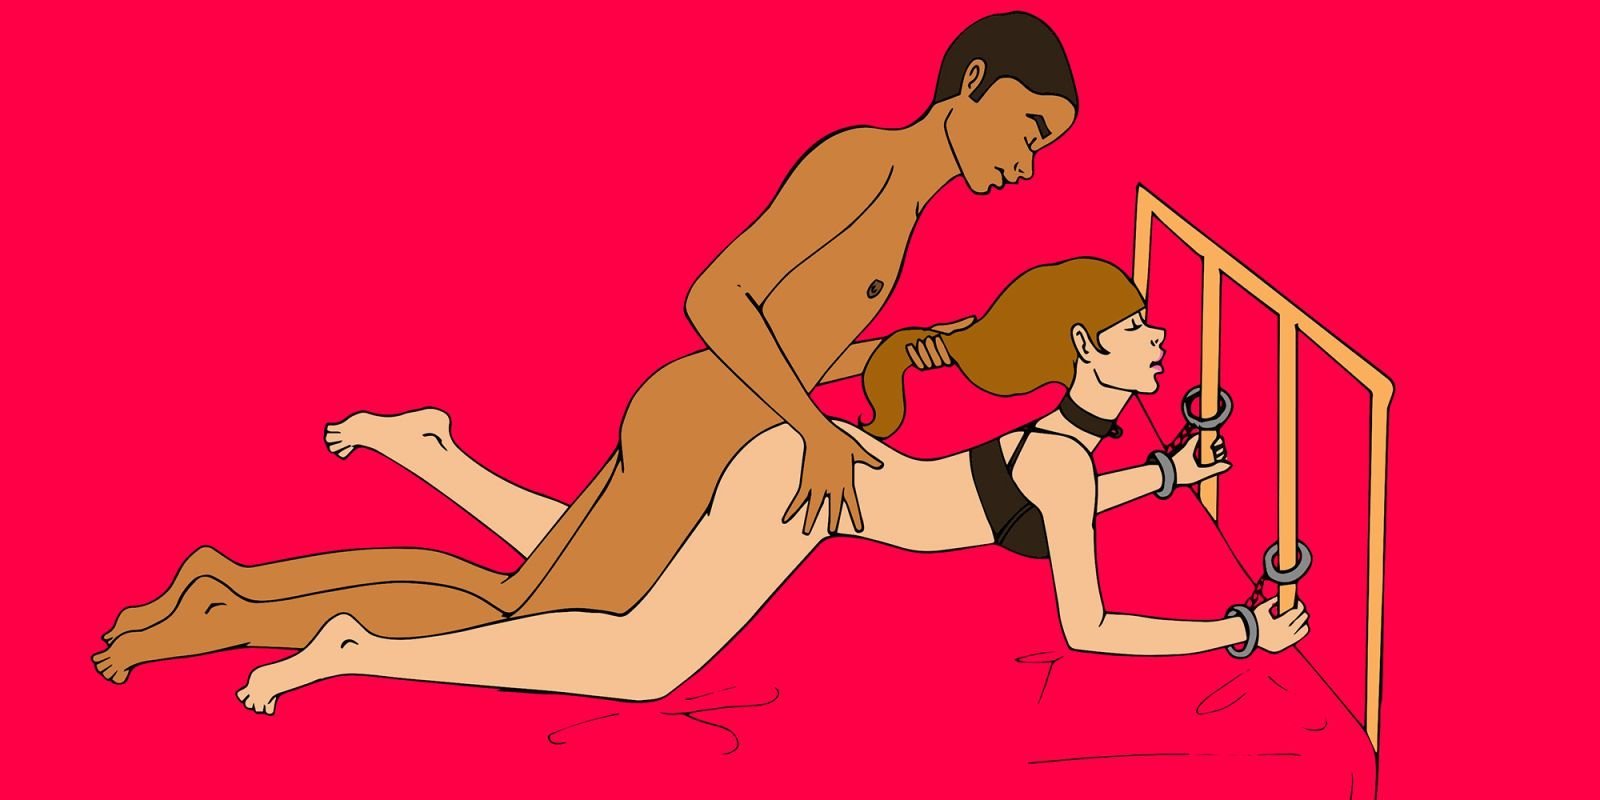 Kamasutra sexual positions lovers